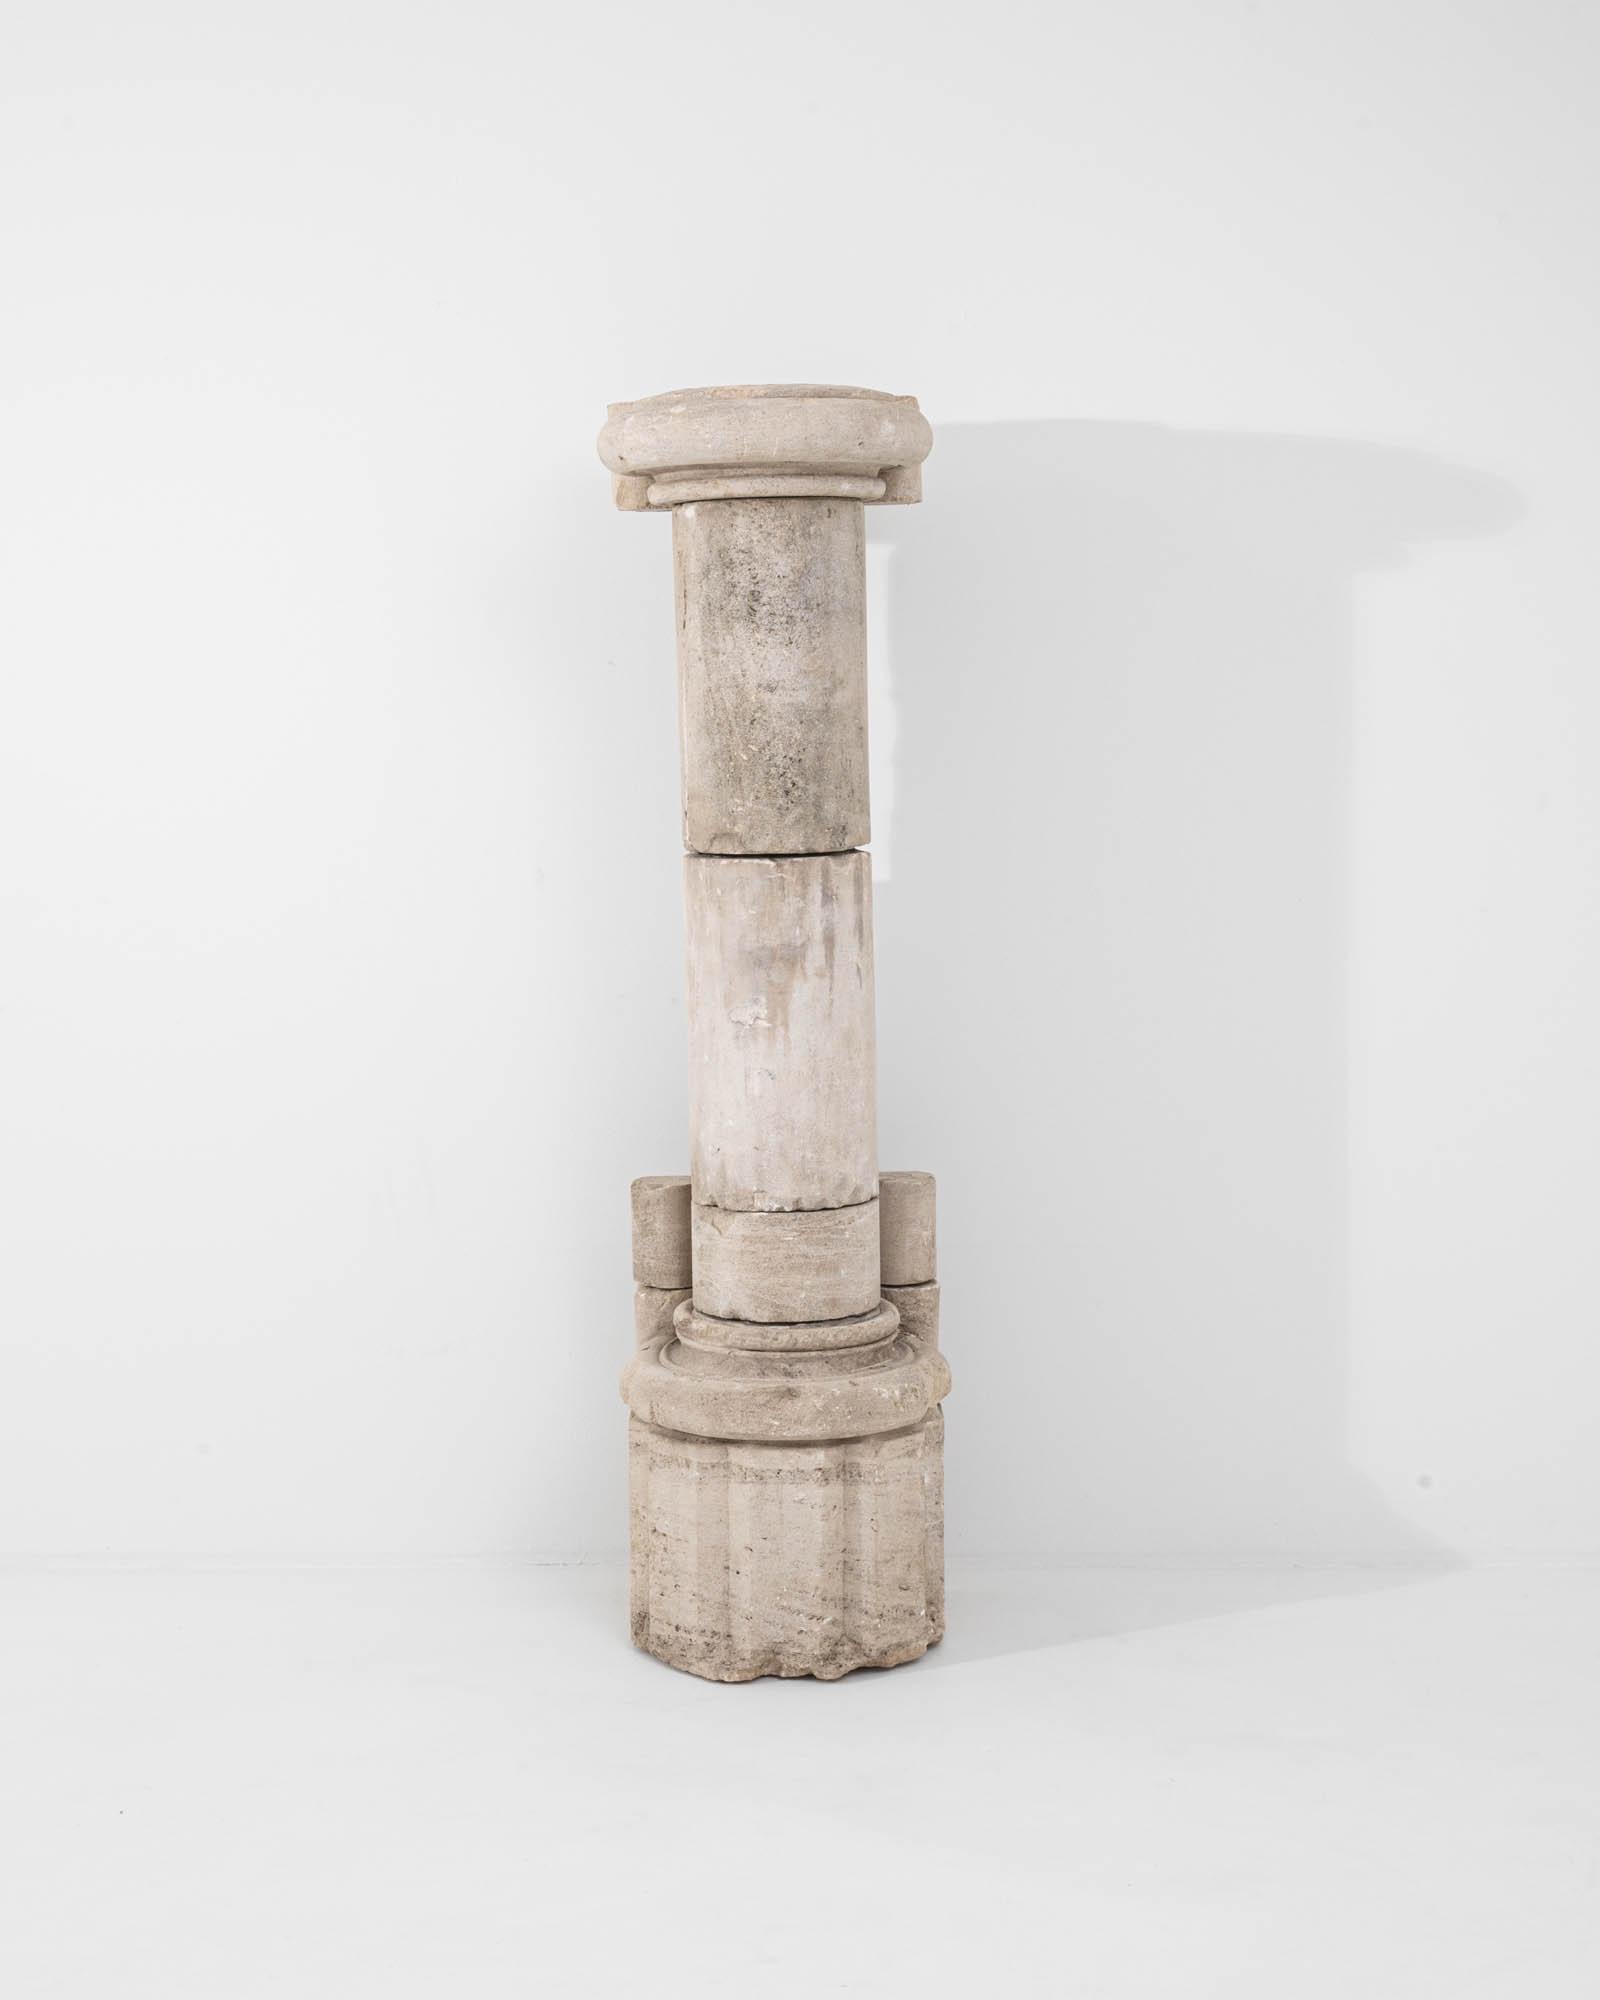 A relic from another time, this antique stone column evokes a sense of romantic ruin. Built in France circa 1800, the form is based on the Tuscan columns of classical Roman architecture. The truncated edges of the stone attest to the fact that this